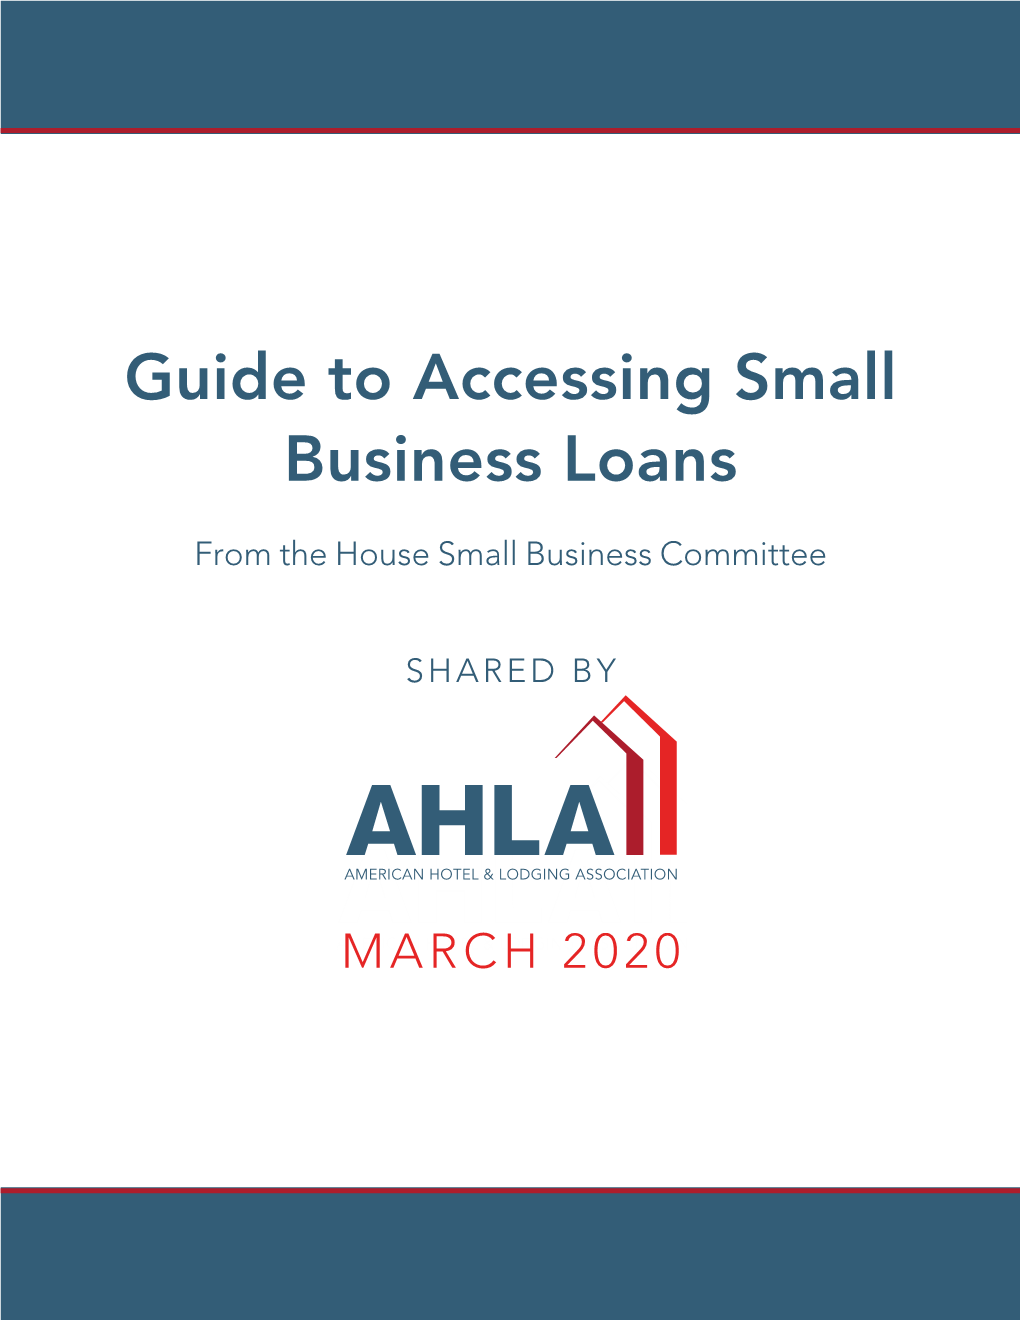 Guide to Accessing Small Business Loans from the House Small Business Committee